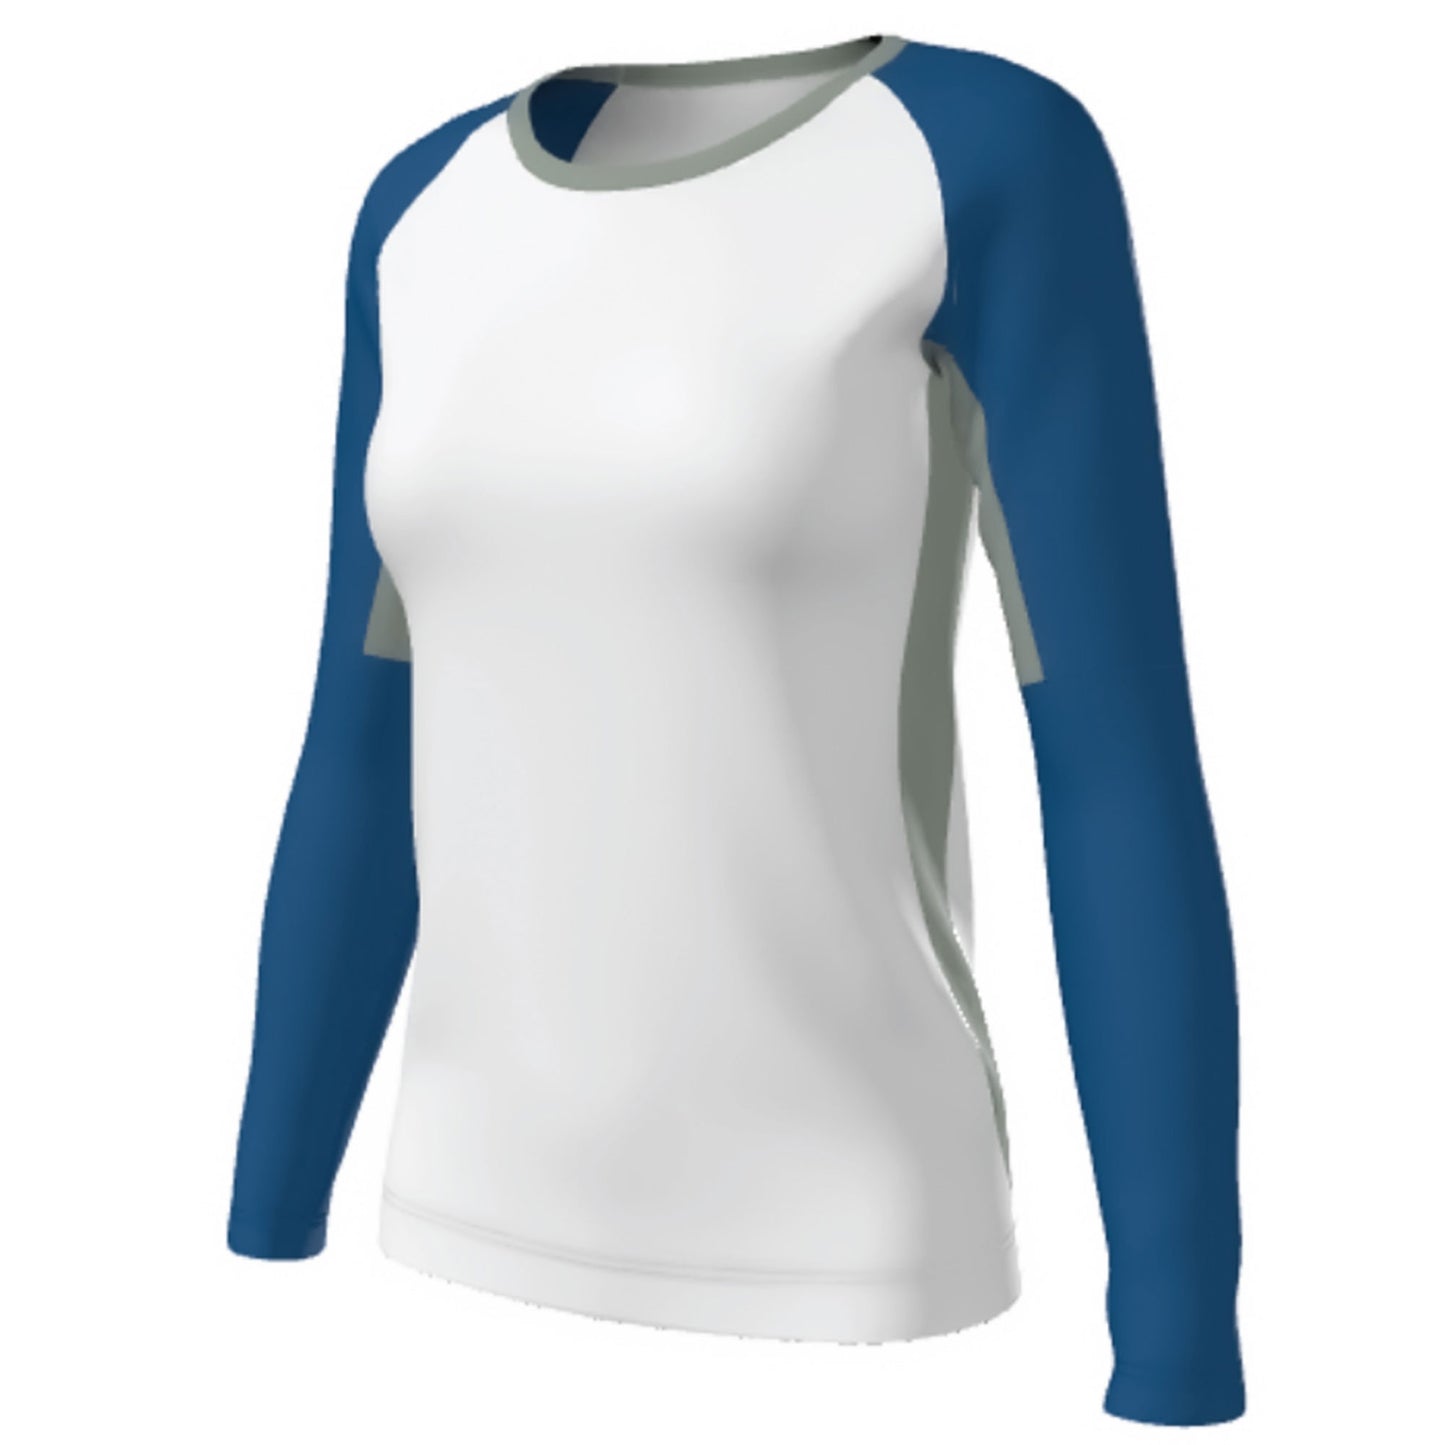 Juice Crew Neck Raglan Long Sleeve Fitted Volleyball Jersey - Sublimated